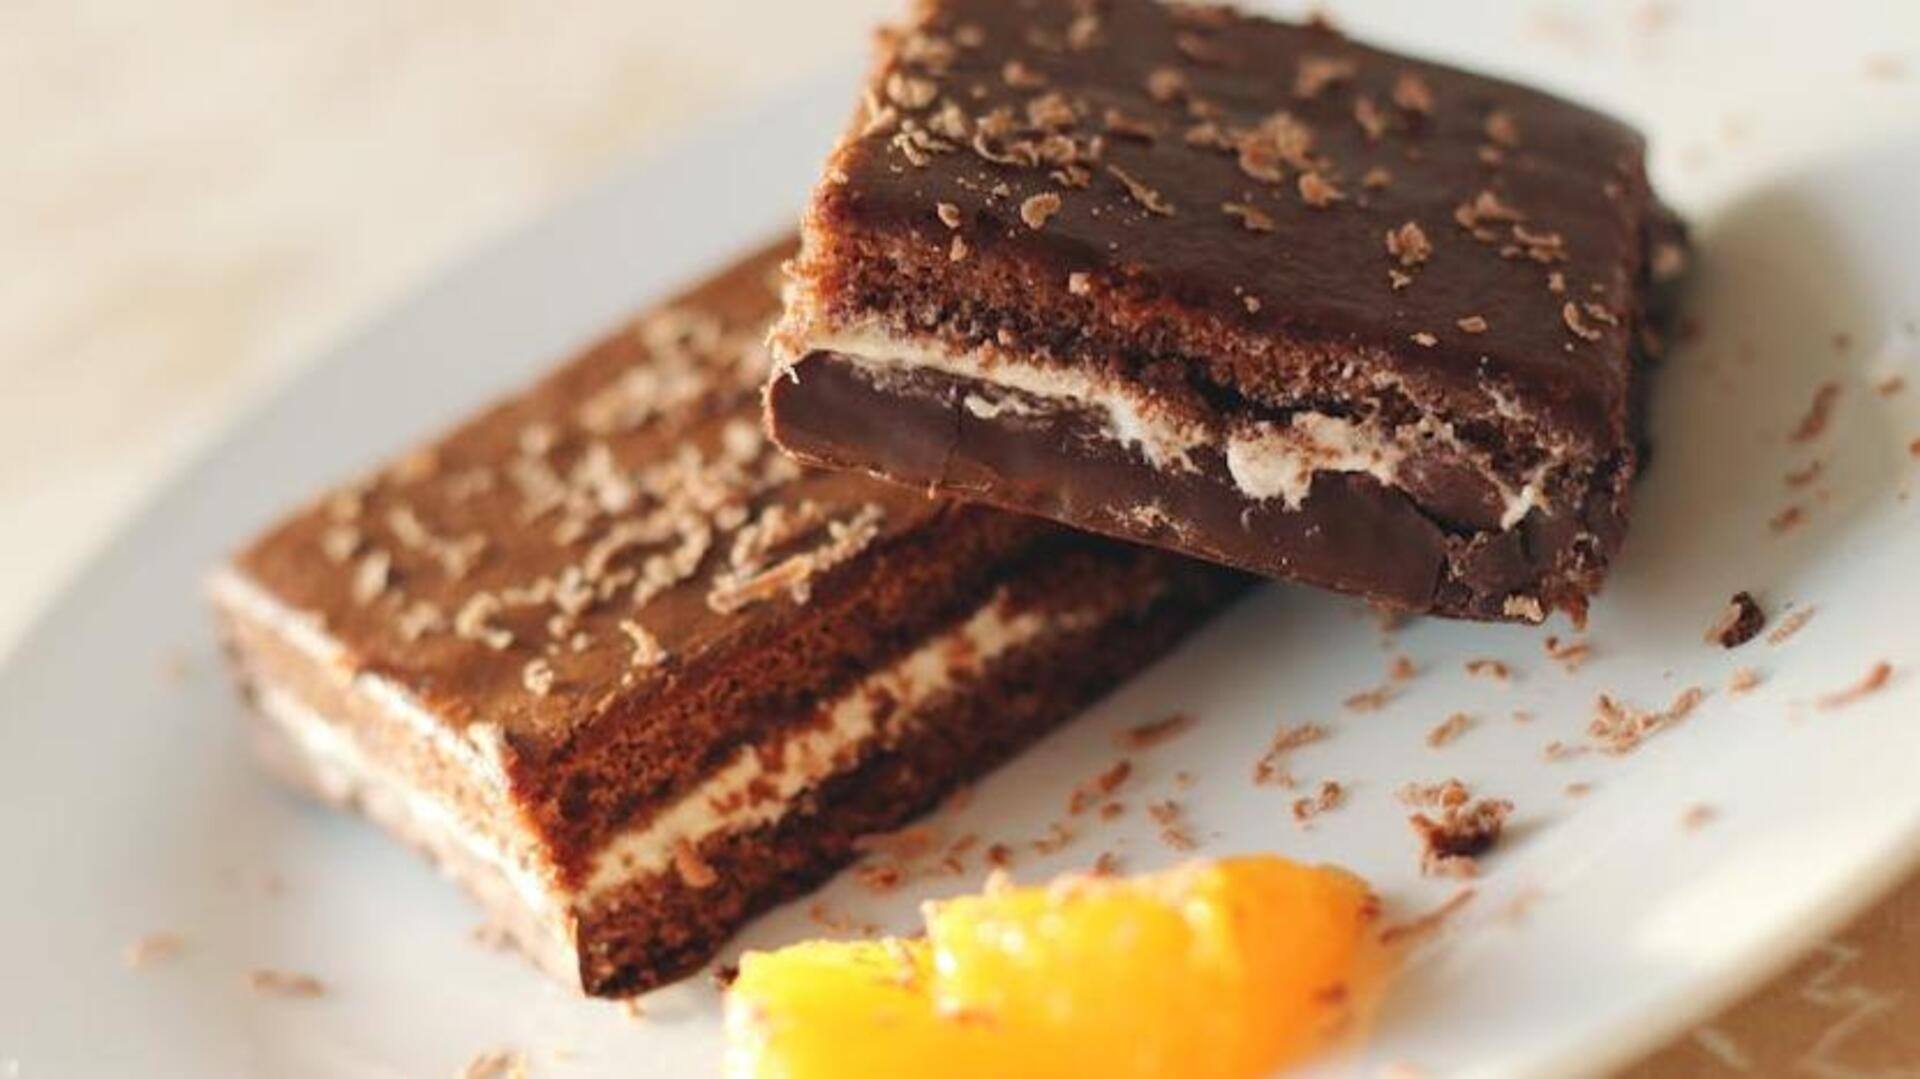 These sweet potato vegan and gluten-free delights are super healthy